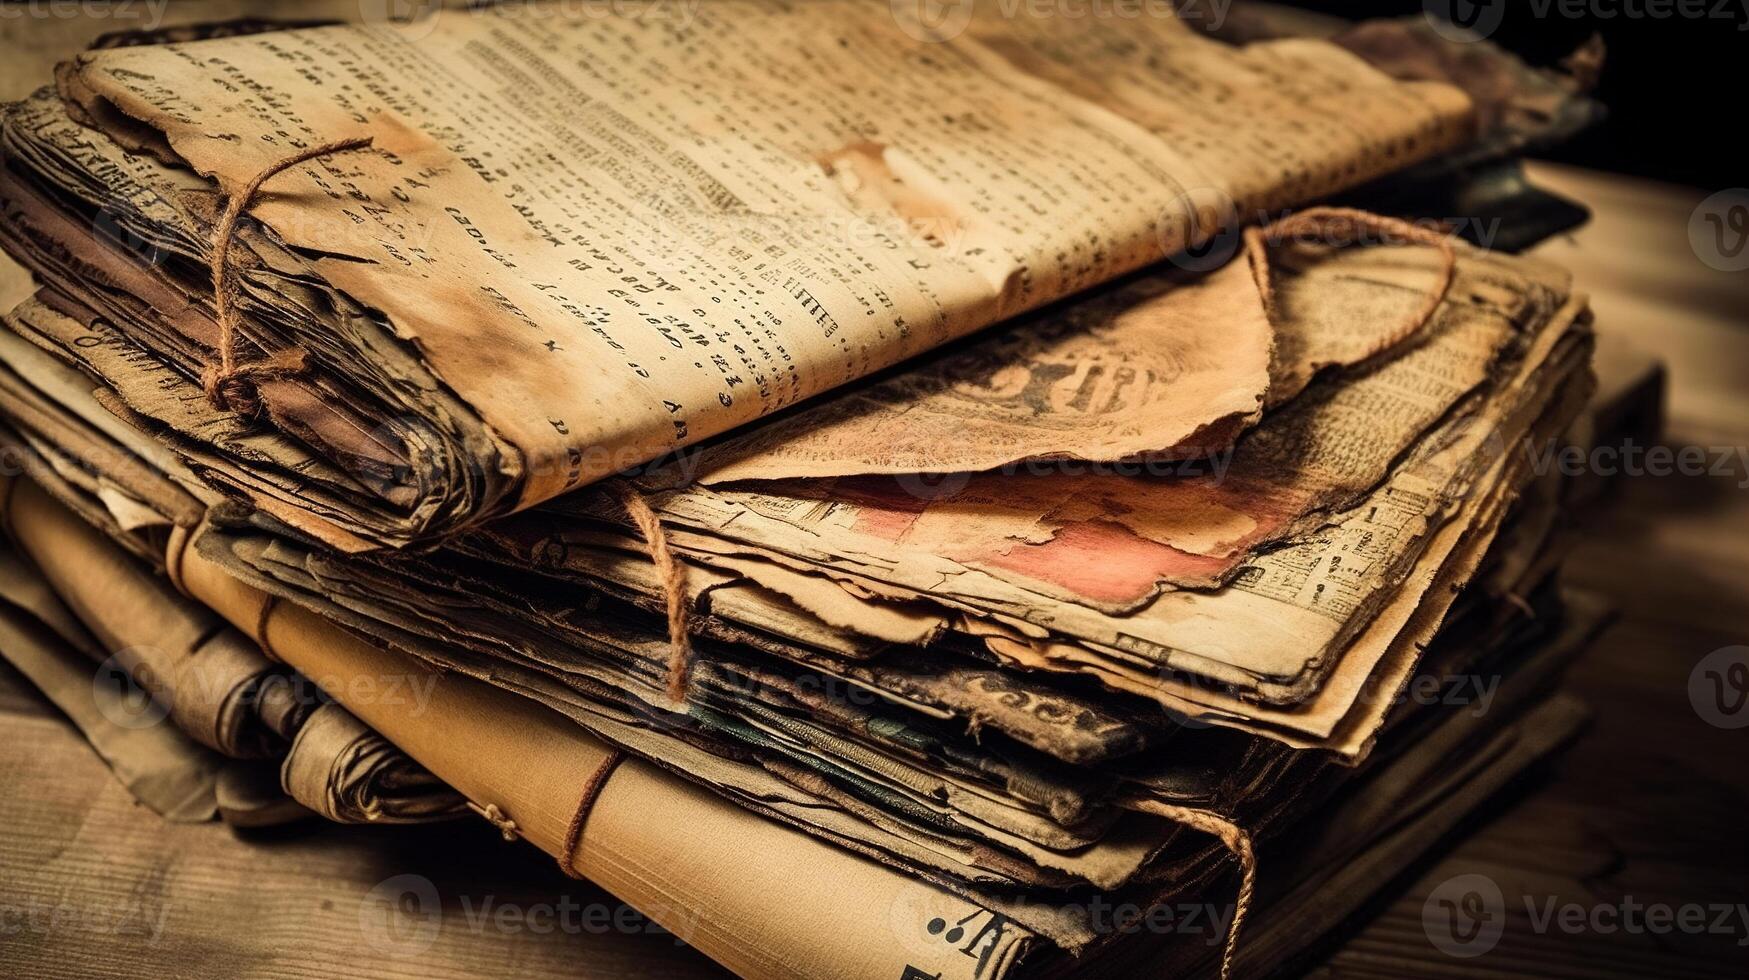 Old, damaged books or history scrolls written in the Middle Ages or earlier. photo